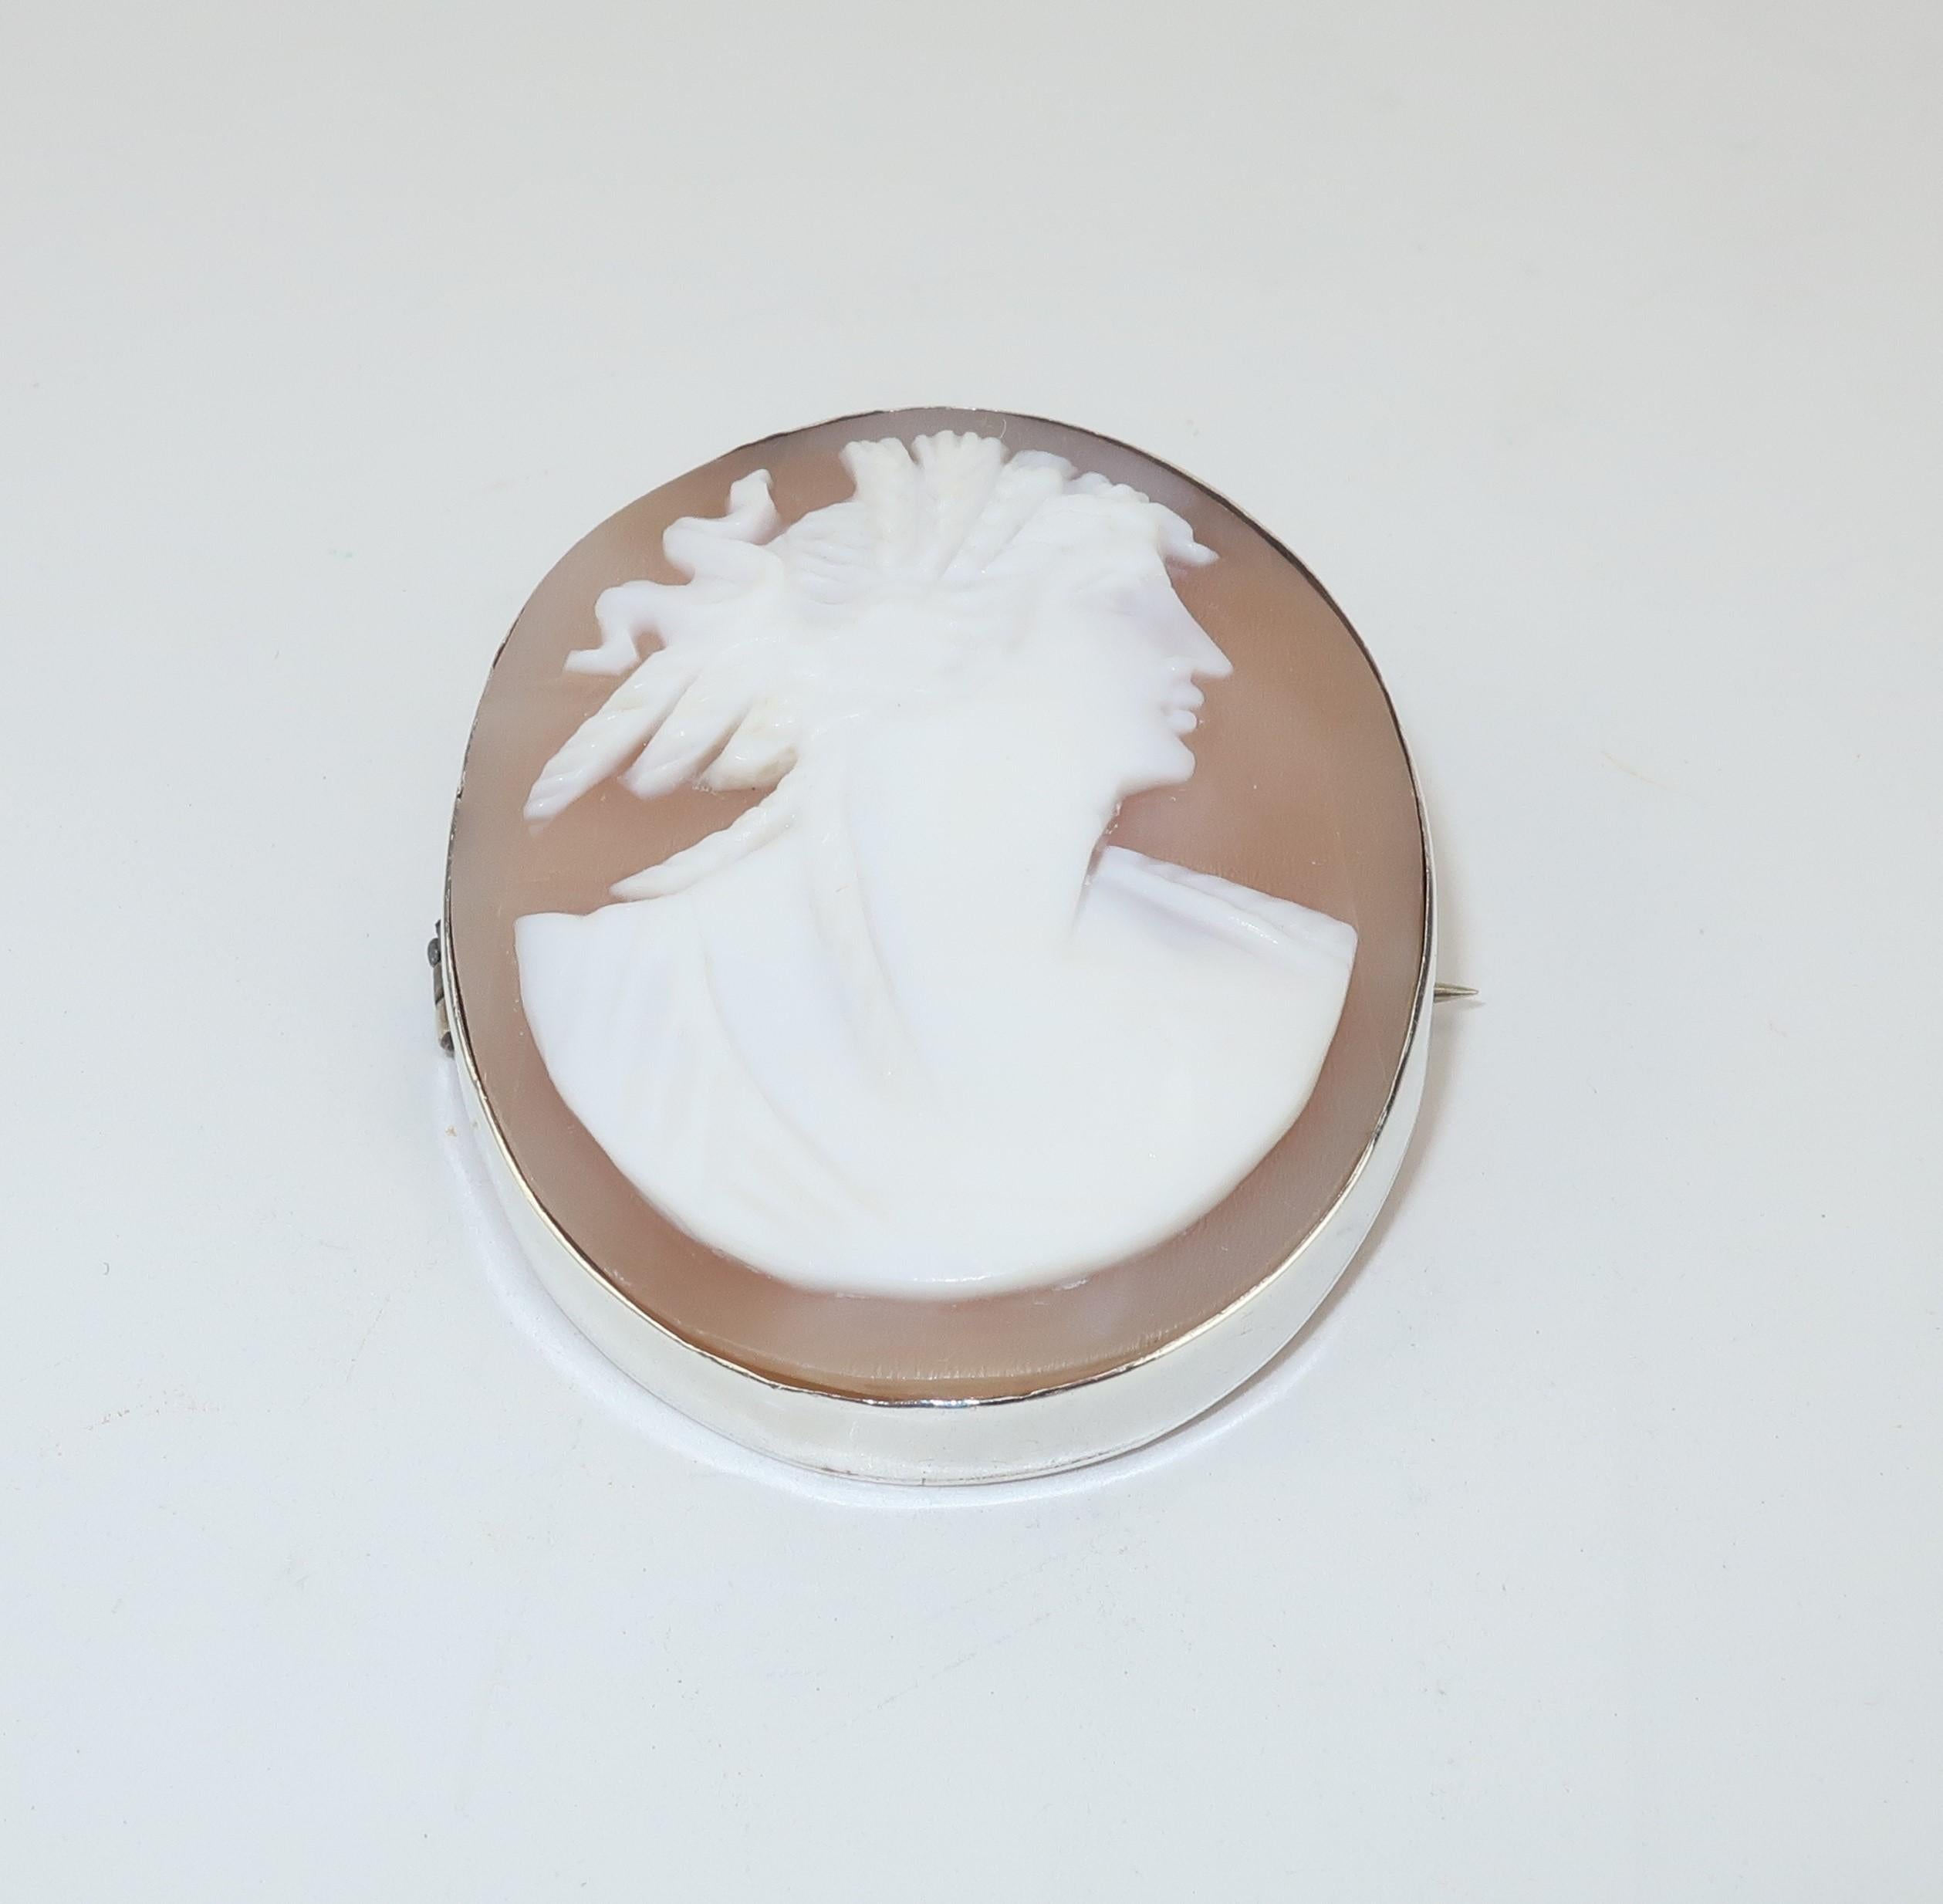 Cameos are true pieces of artistic portraiture often depicting old world ethereal beauty and providing nostalgic charm to modern wardrobes.  This early 1900's carved shell cameo depicts a beautiful woman with a goddess aesthetic including an